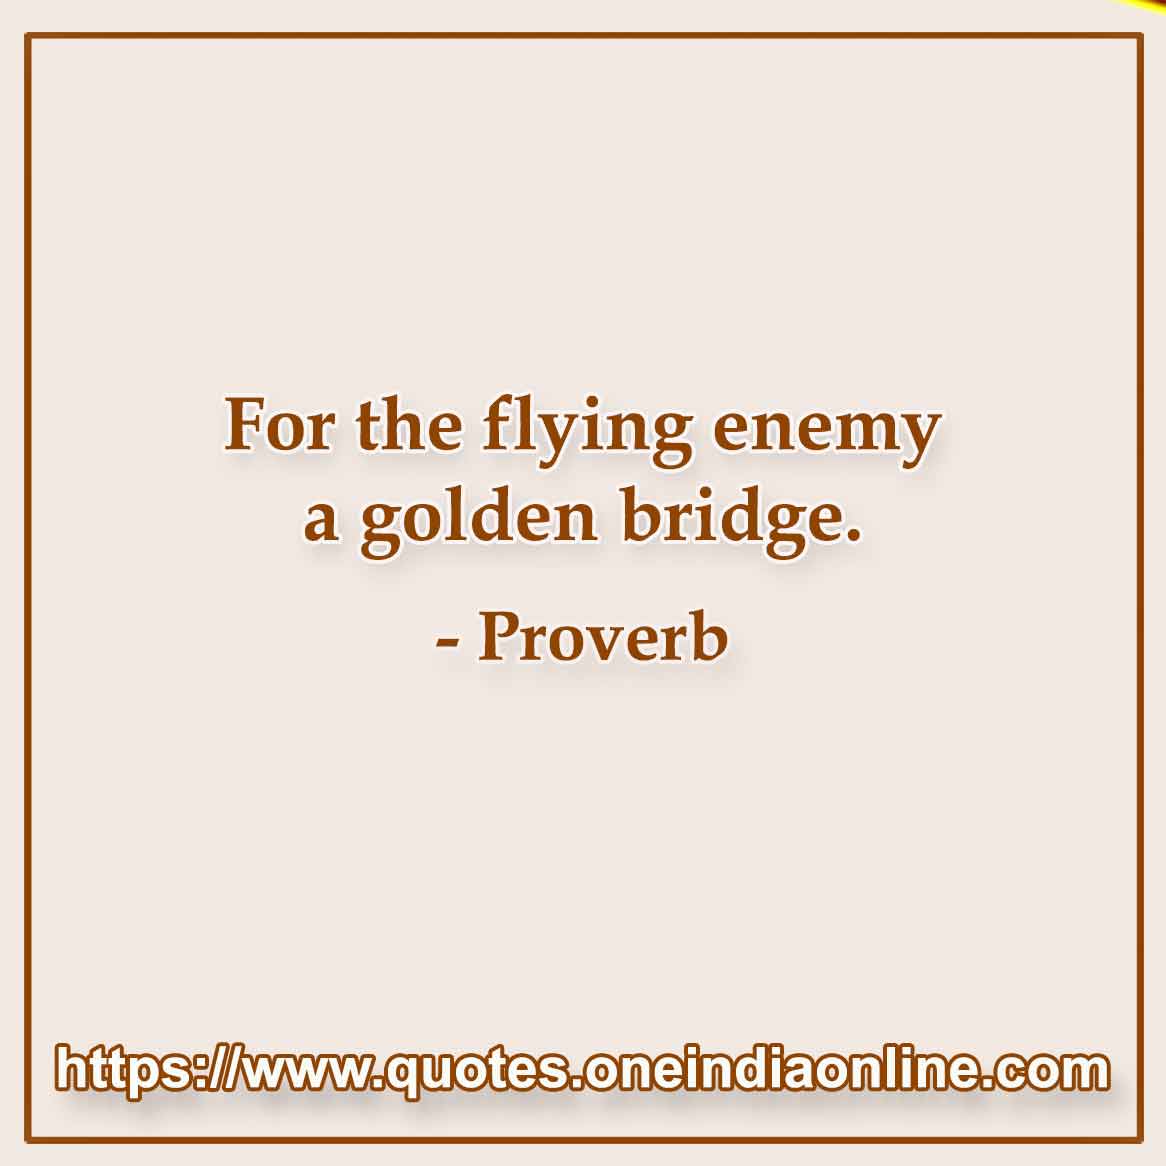 For the flying enemy a golden bridge.

